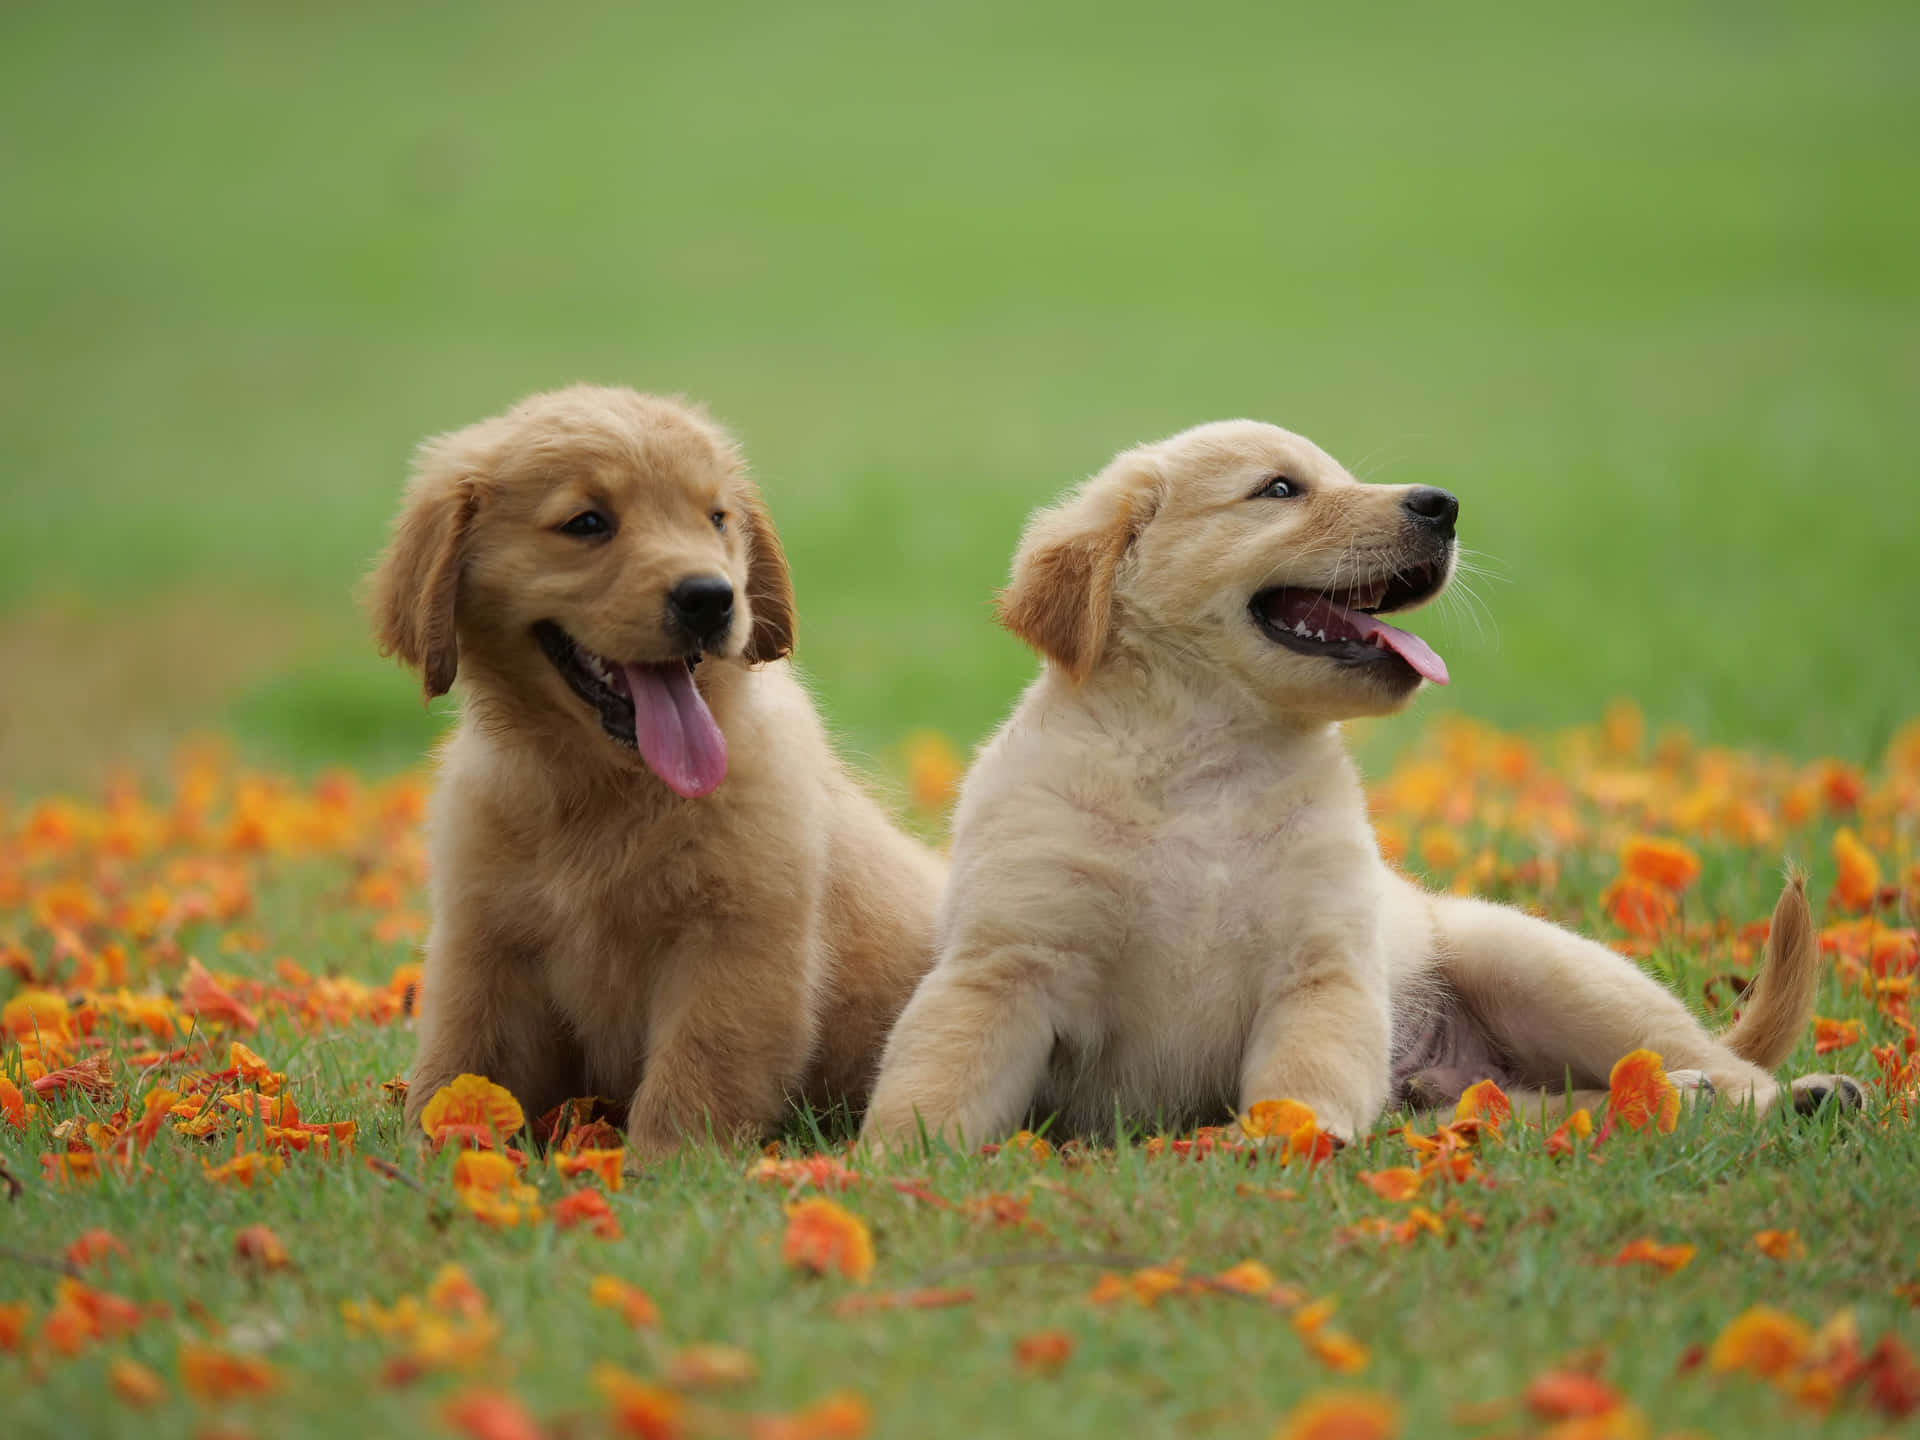 "Two Adorable Little Puppies!" Wallpaper